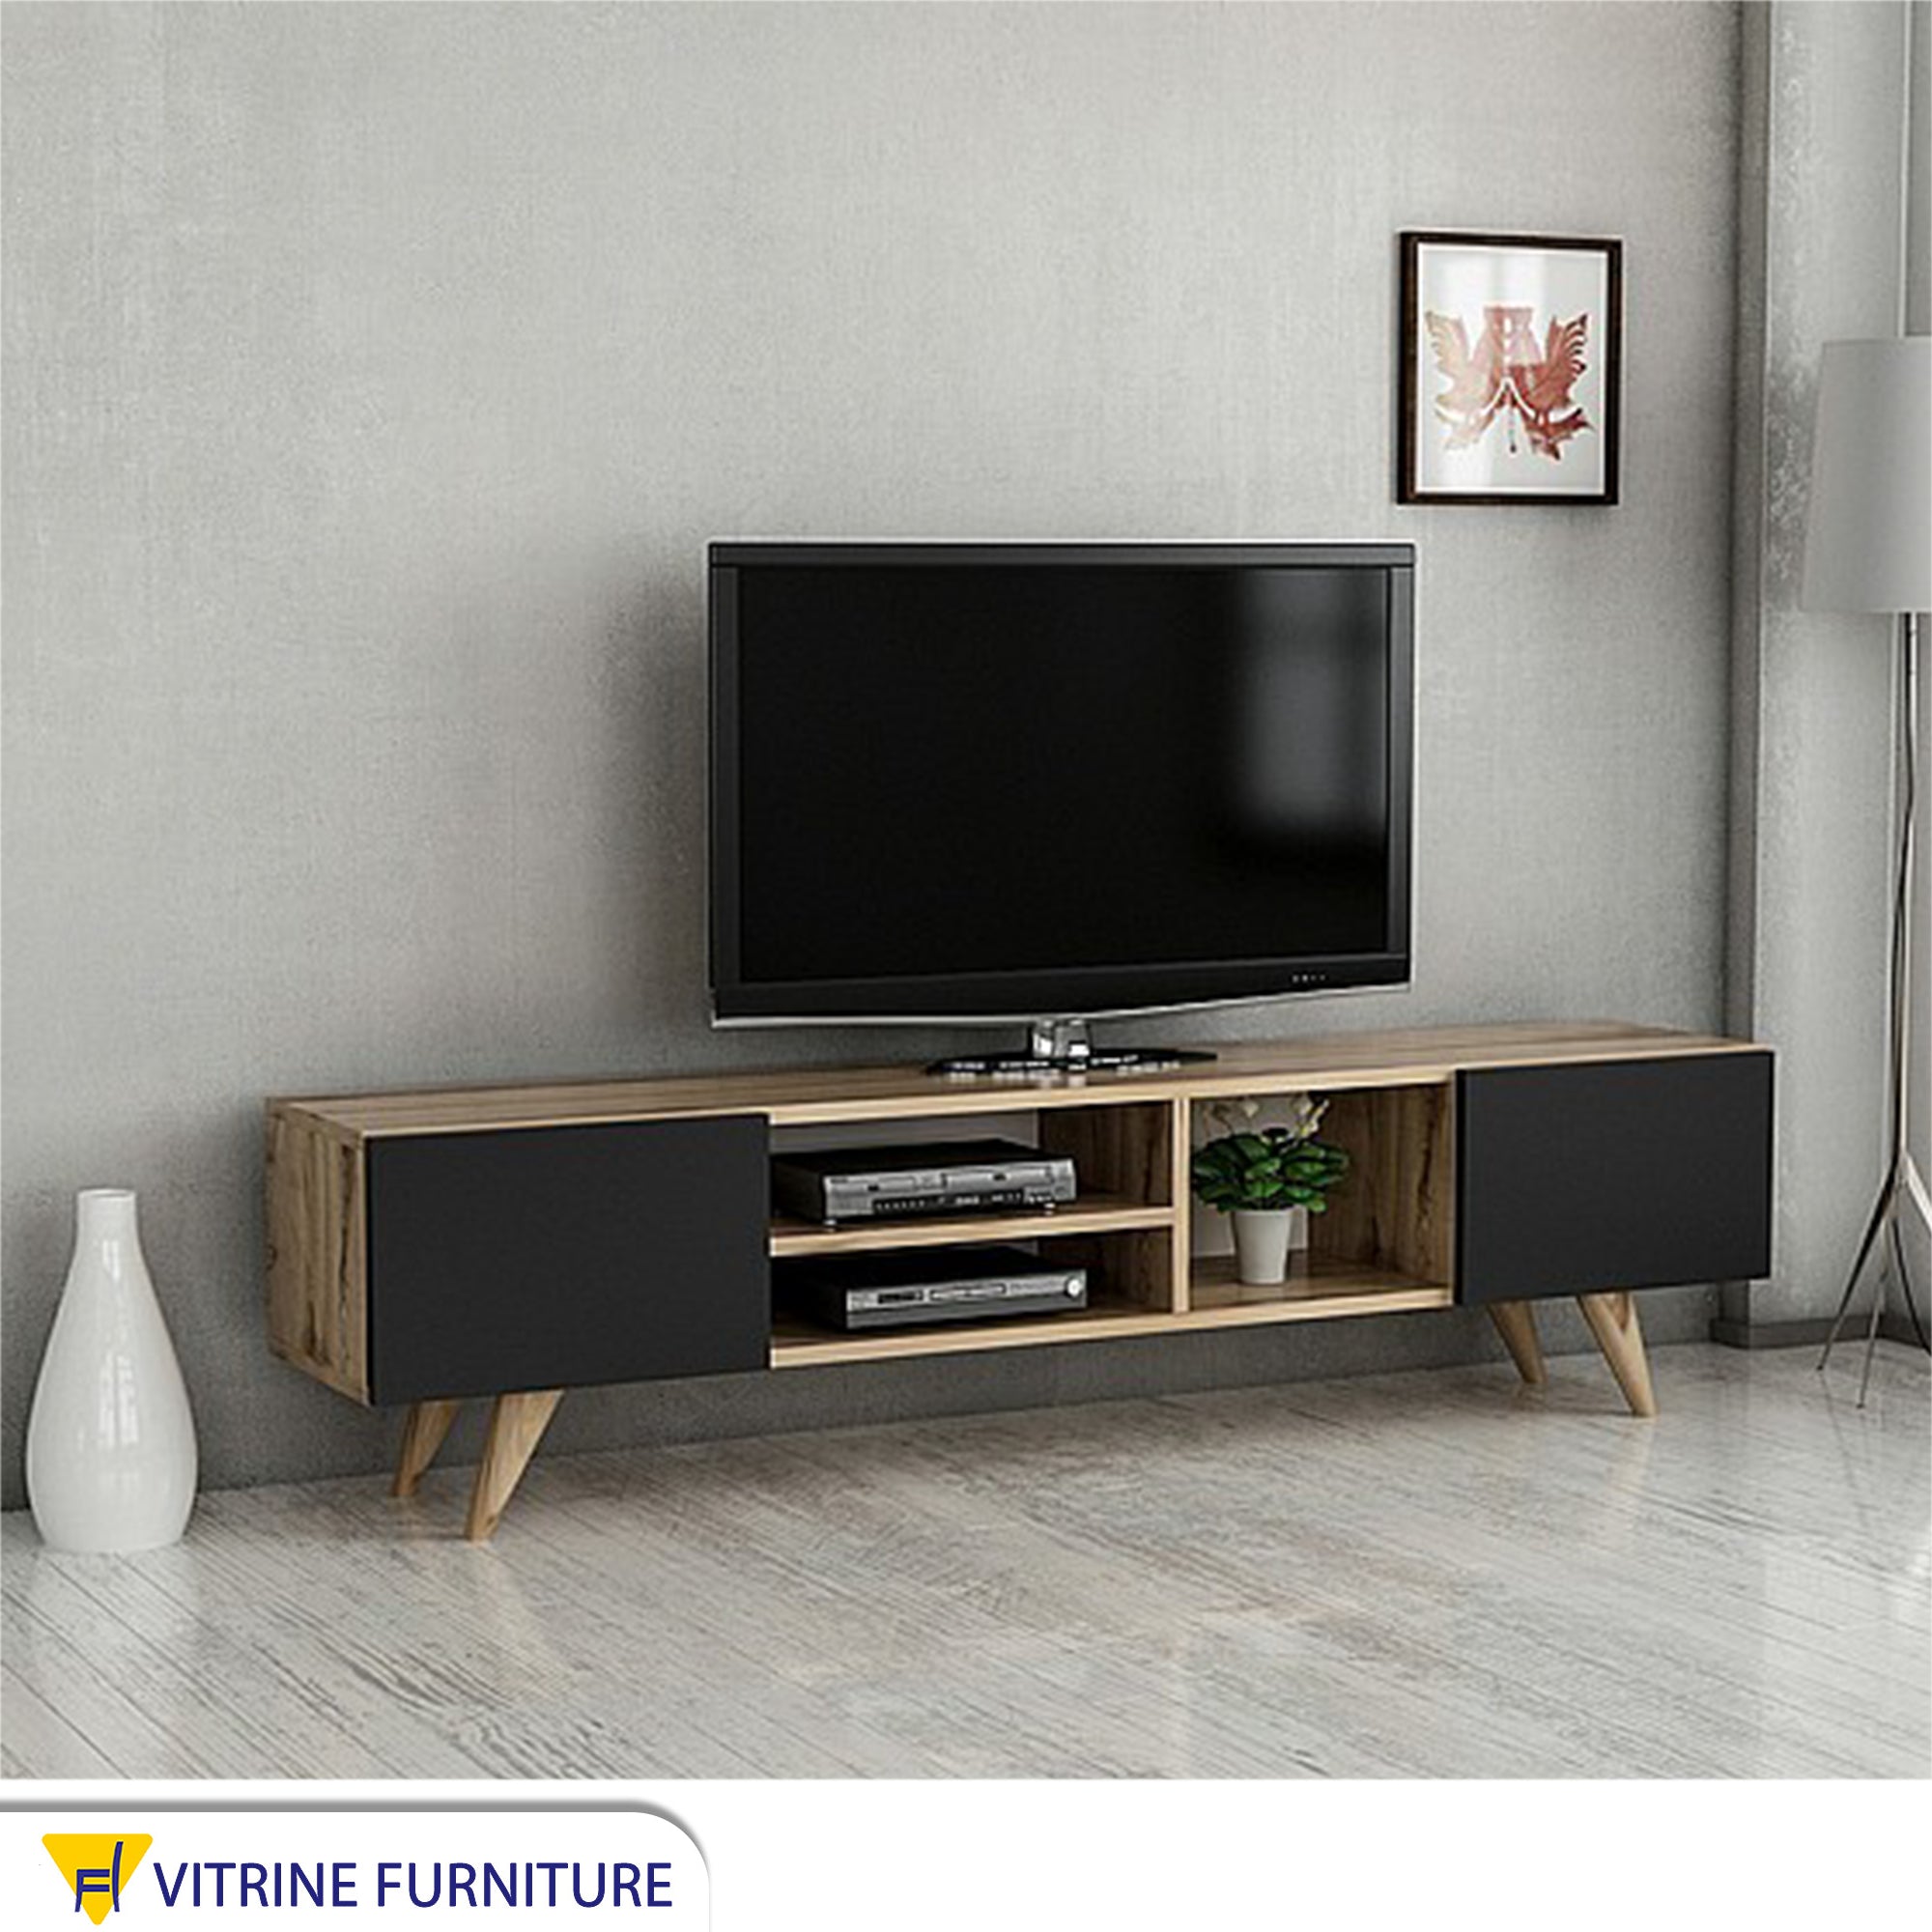 TV table with high legs, black and beige